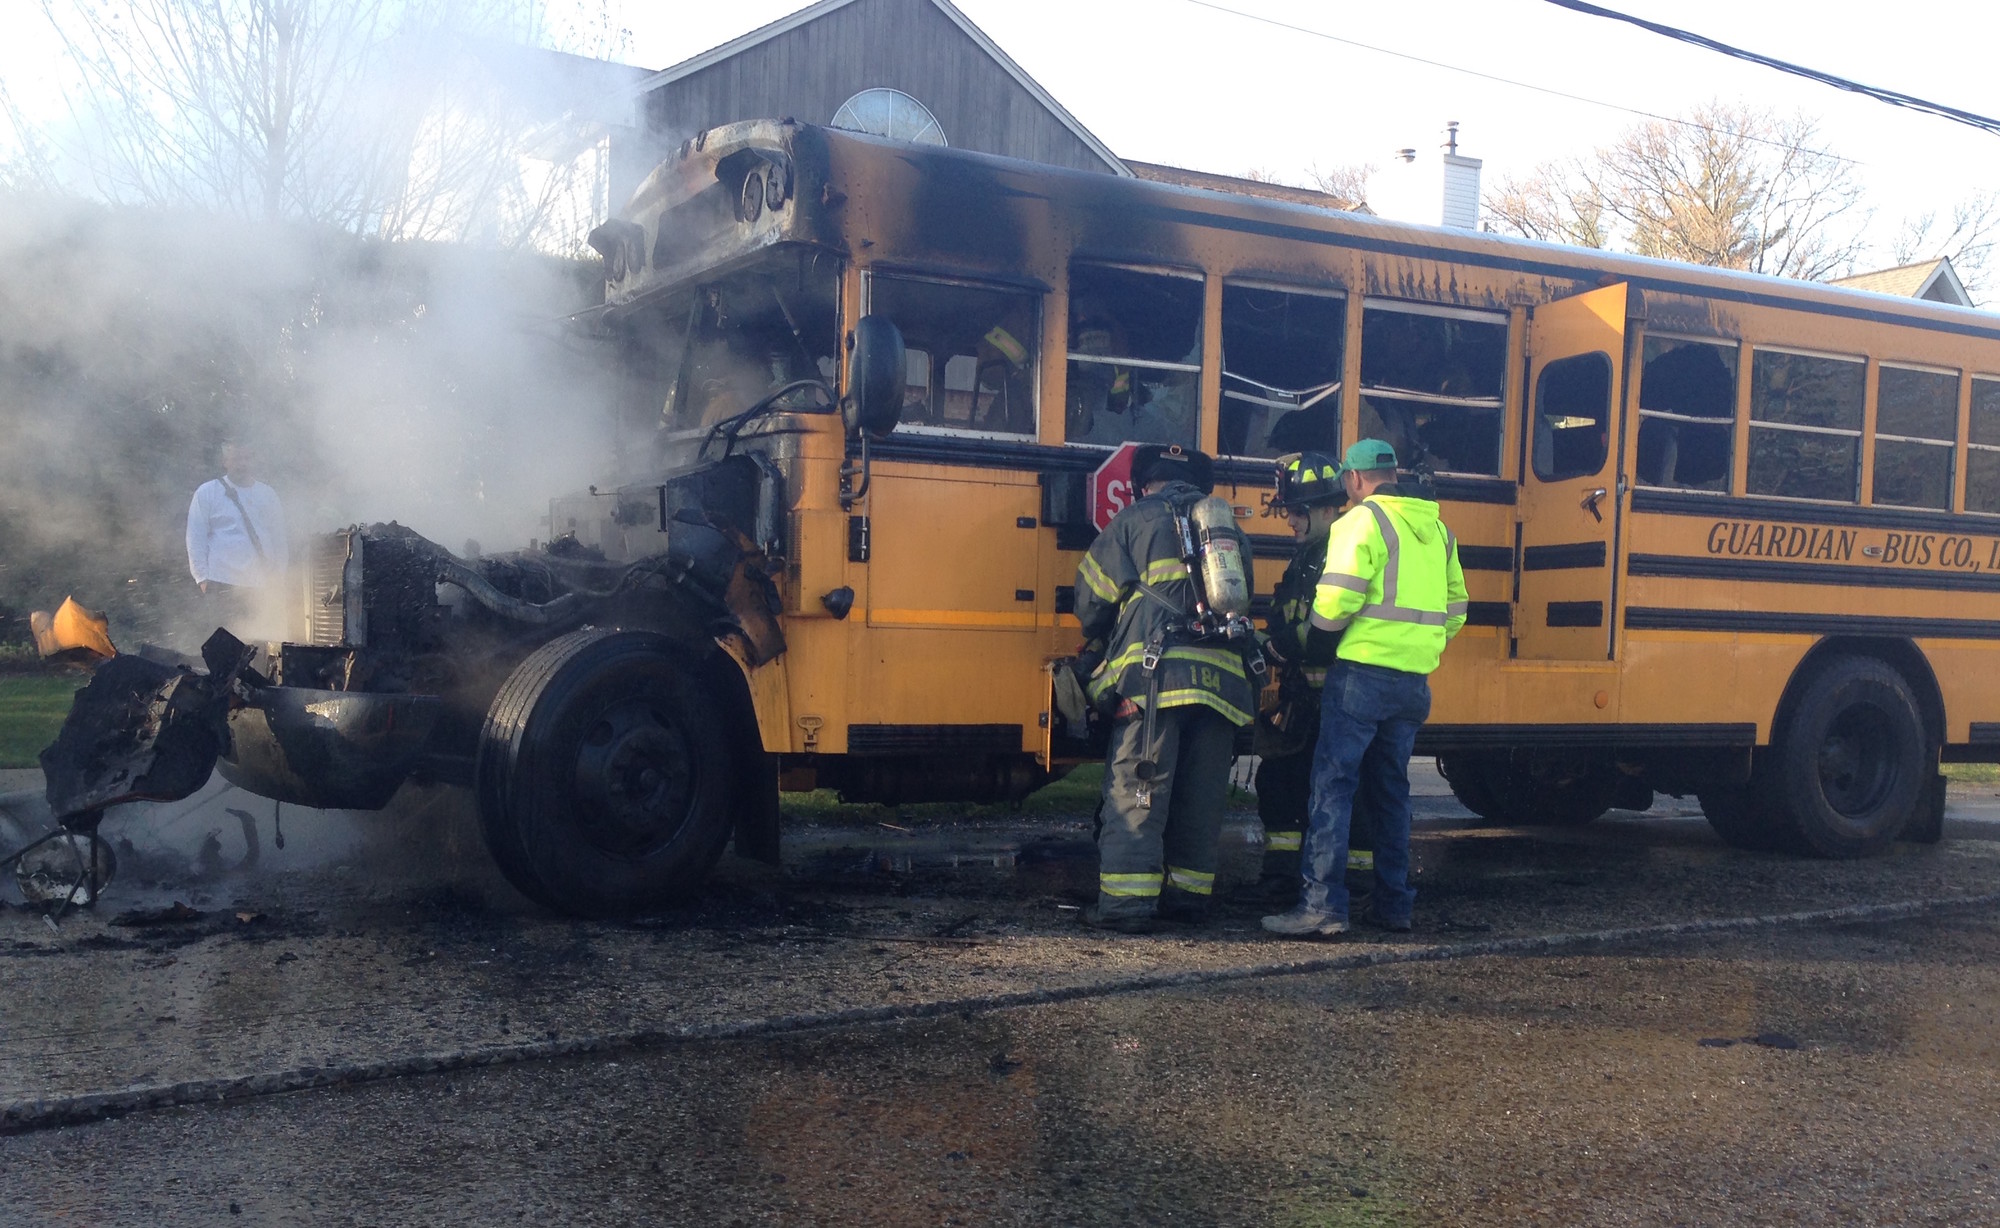 Flames engulfed the bus, which was a total loss. Merrick firefighters needed about five minutes to put out the blaze.